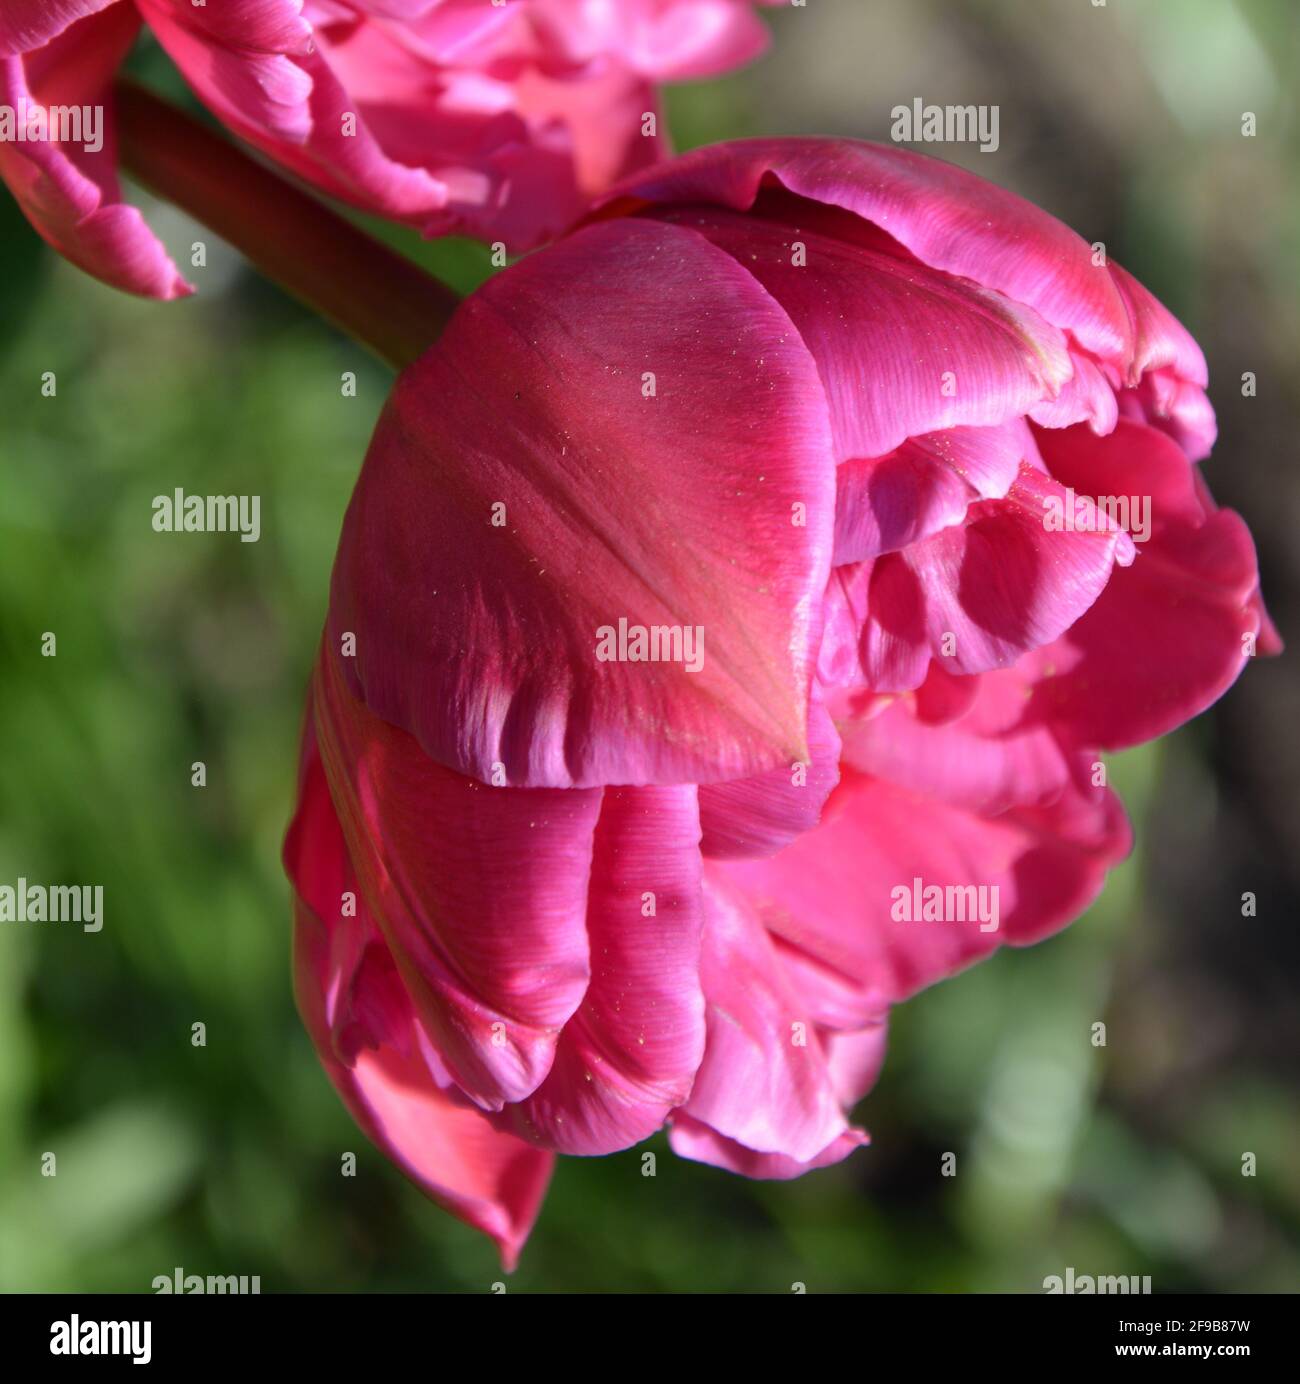 Tulip Red Princess High Resolution, Red tulip with rose petals, bright red tulip, close-up stock photo, DSLR Stock Photo